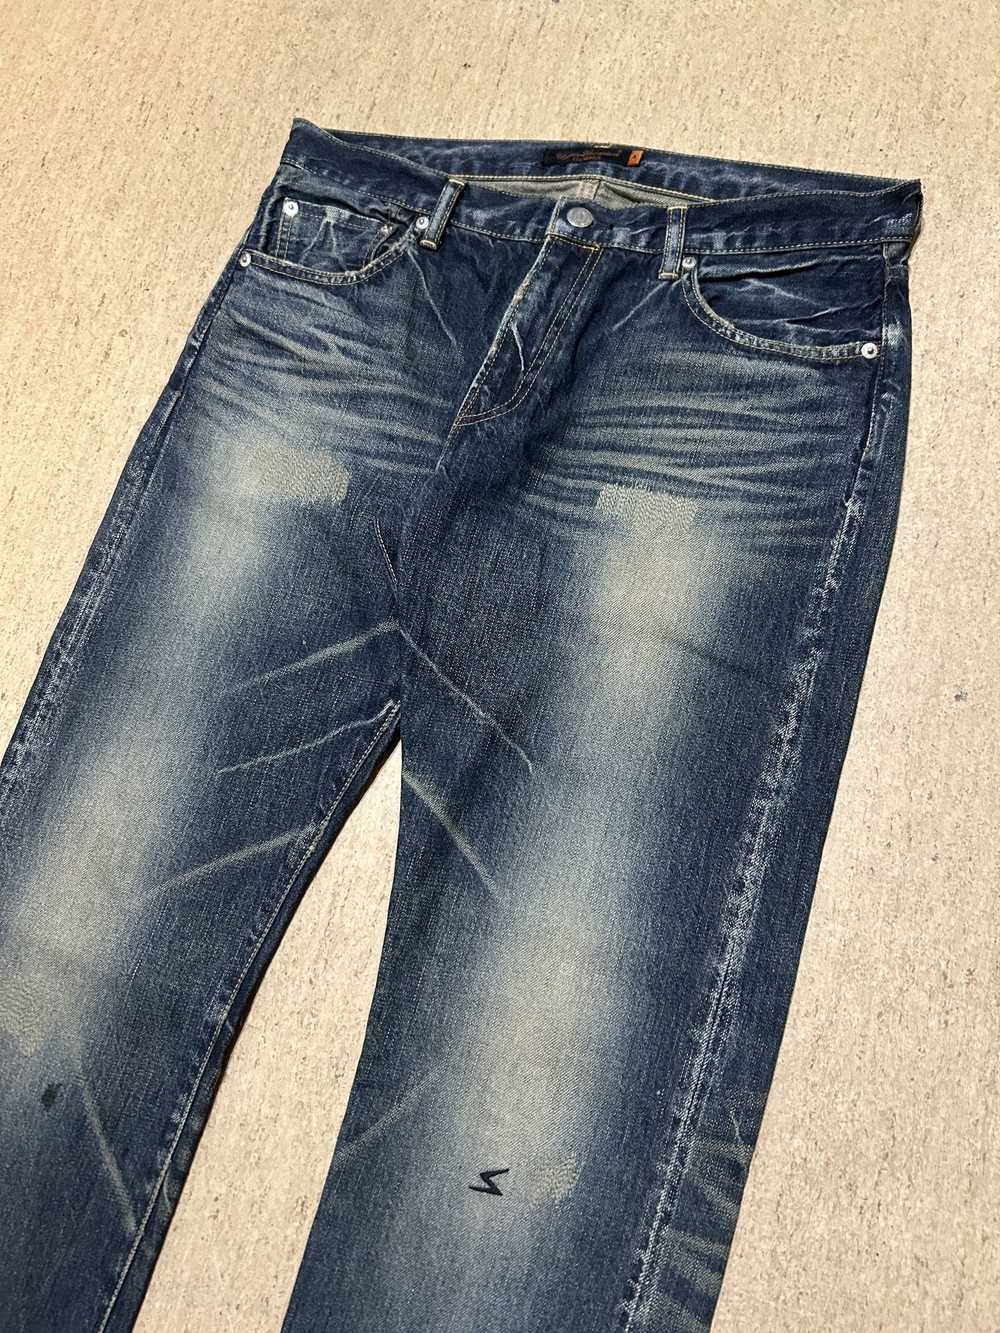 Undercover *SOLD* Undercover aw07 Apple Fang Denim - image 6